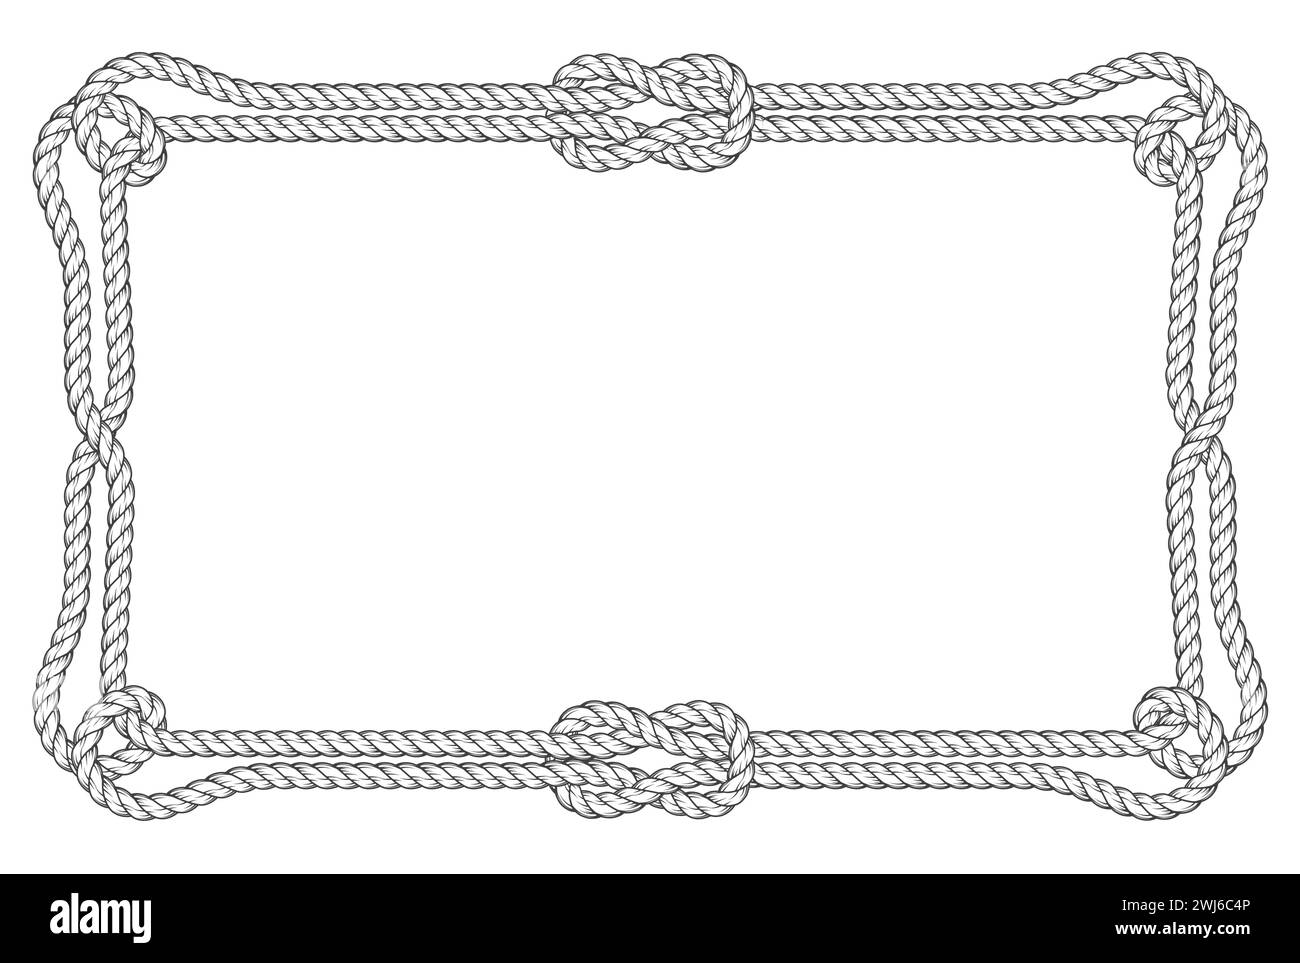 Square rope frame with corner loops, double border and knots, marine frame, vector Stock Vector